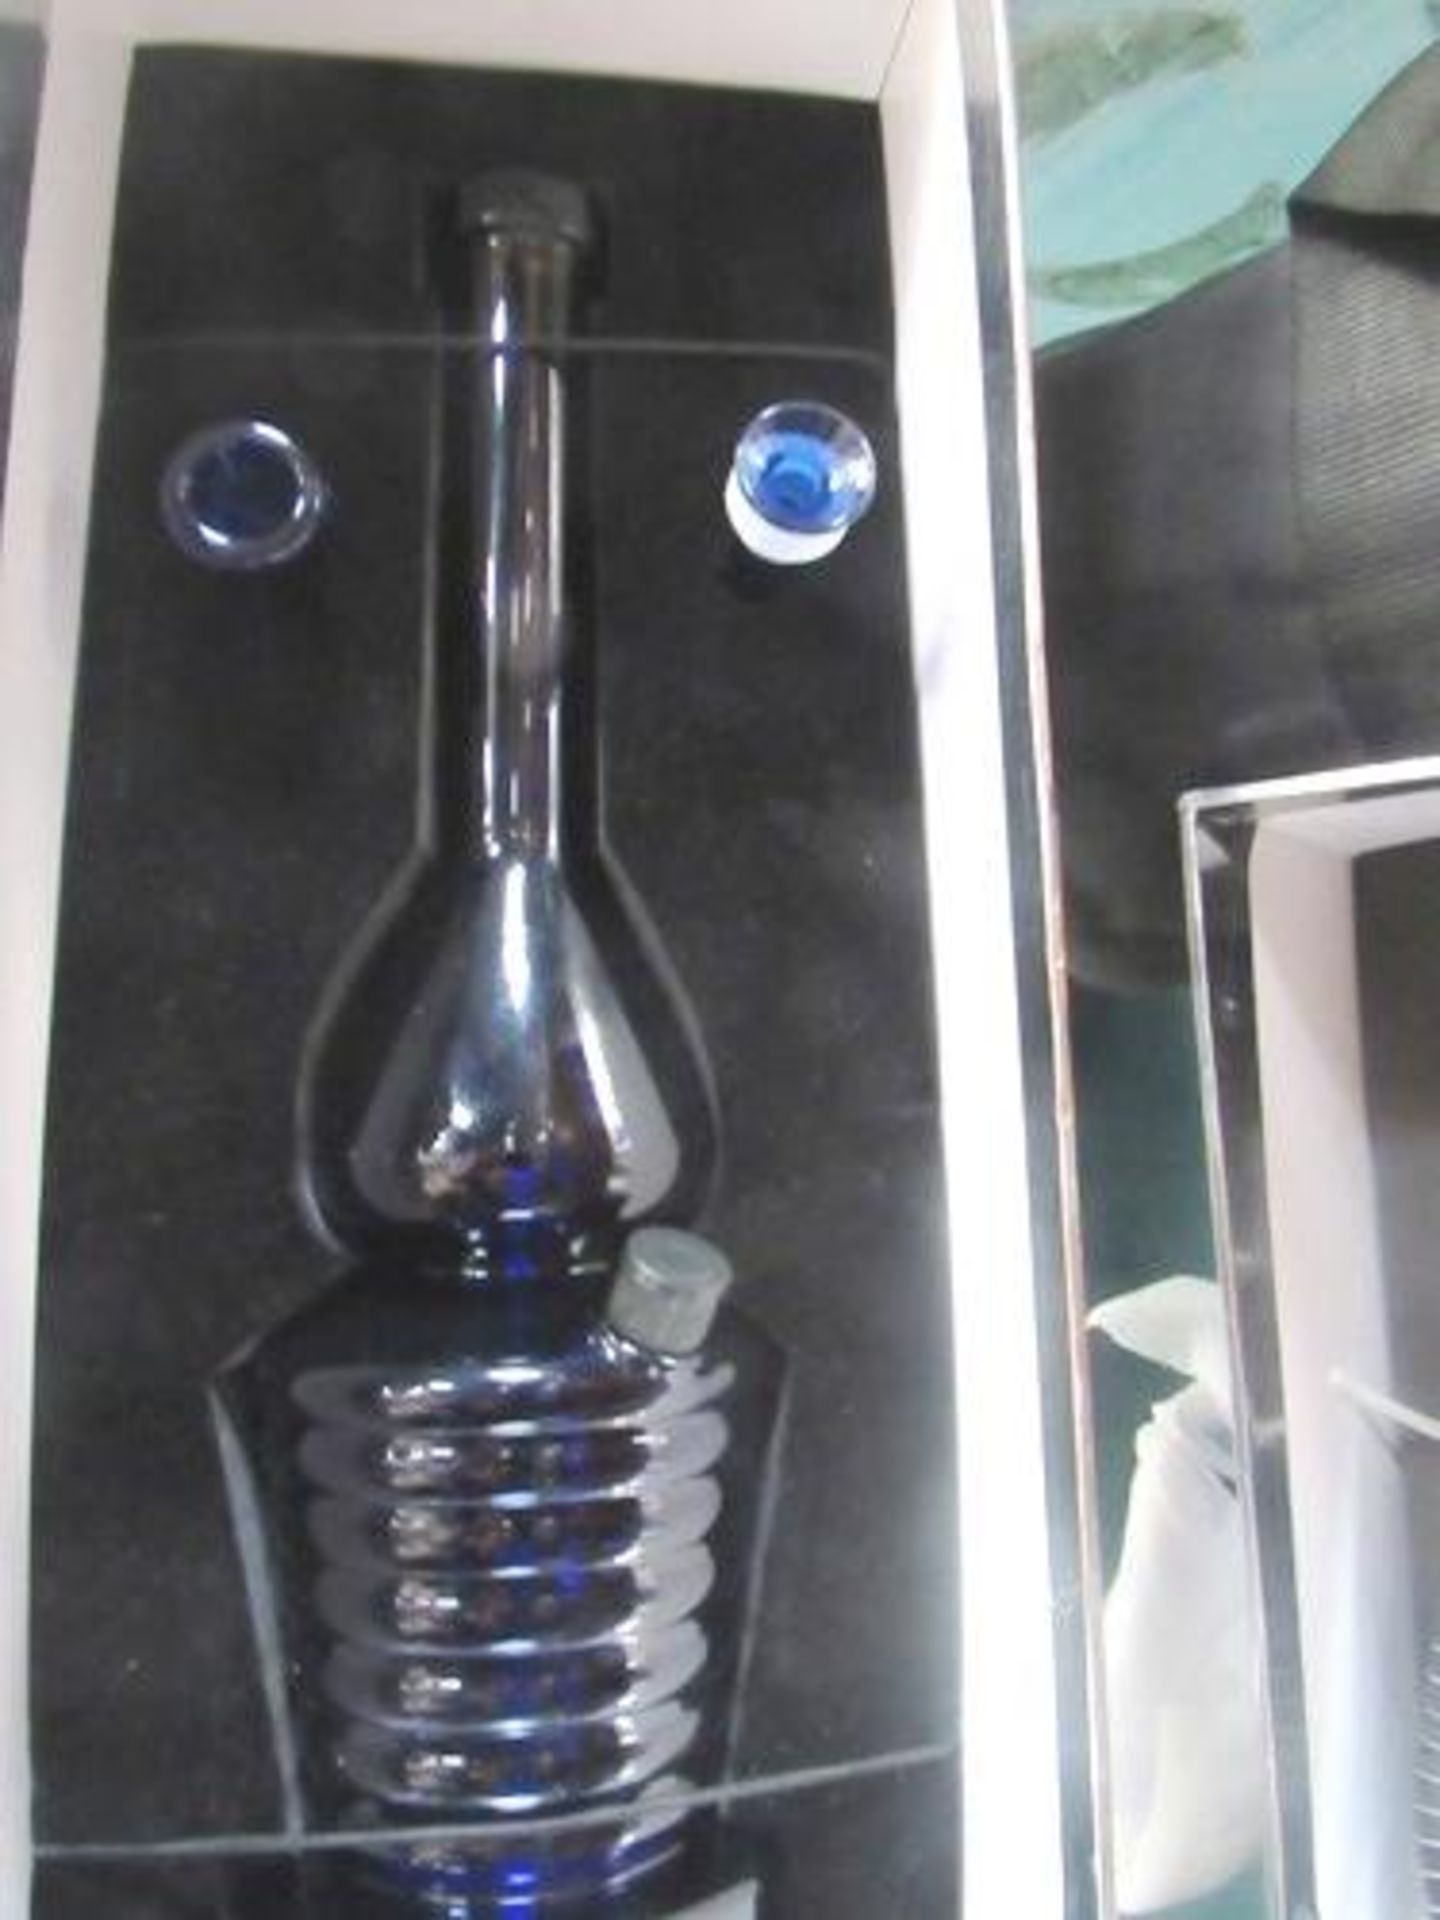 1 x Sloppy Hippo Bristol blue glass hookah pipe with carry case - New in box (C7B) - Image 3 of 3